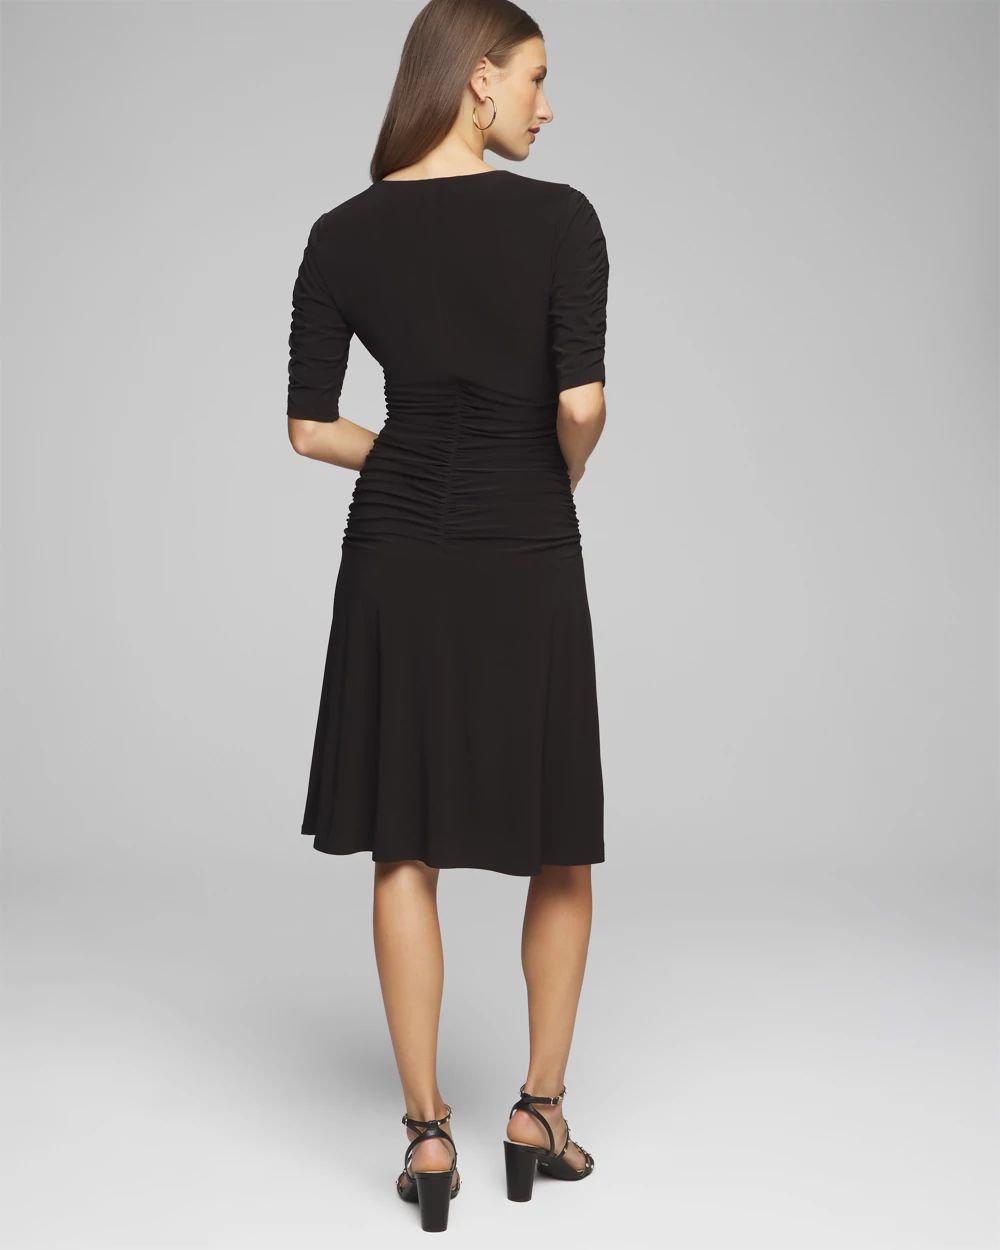 Elbow Sleeve V-Neck Ruched Matte Jersey Dress click to view larger image.